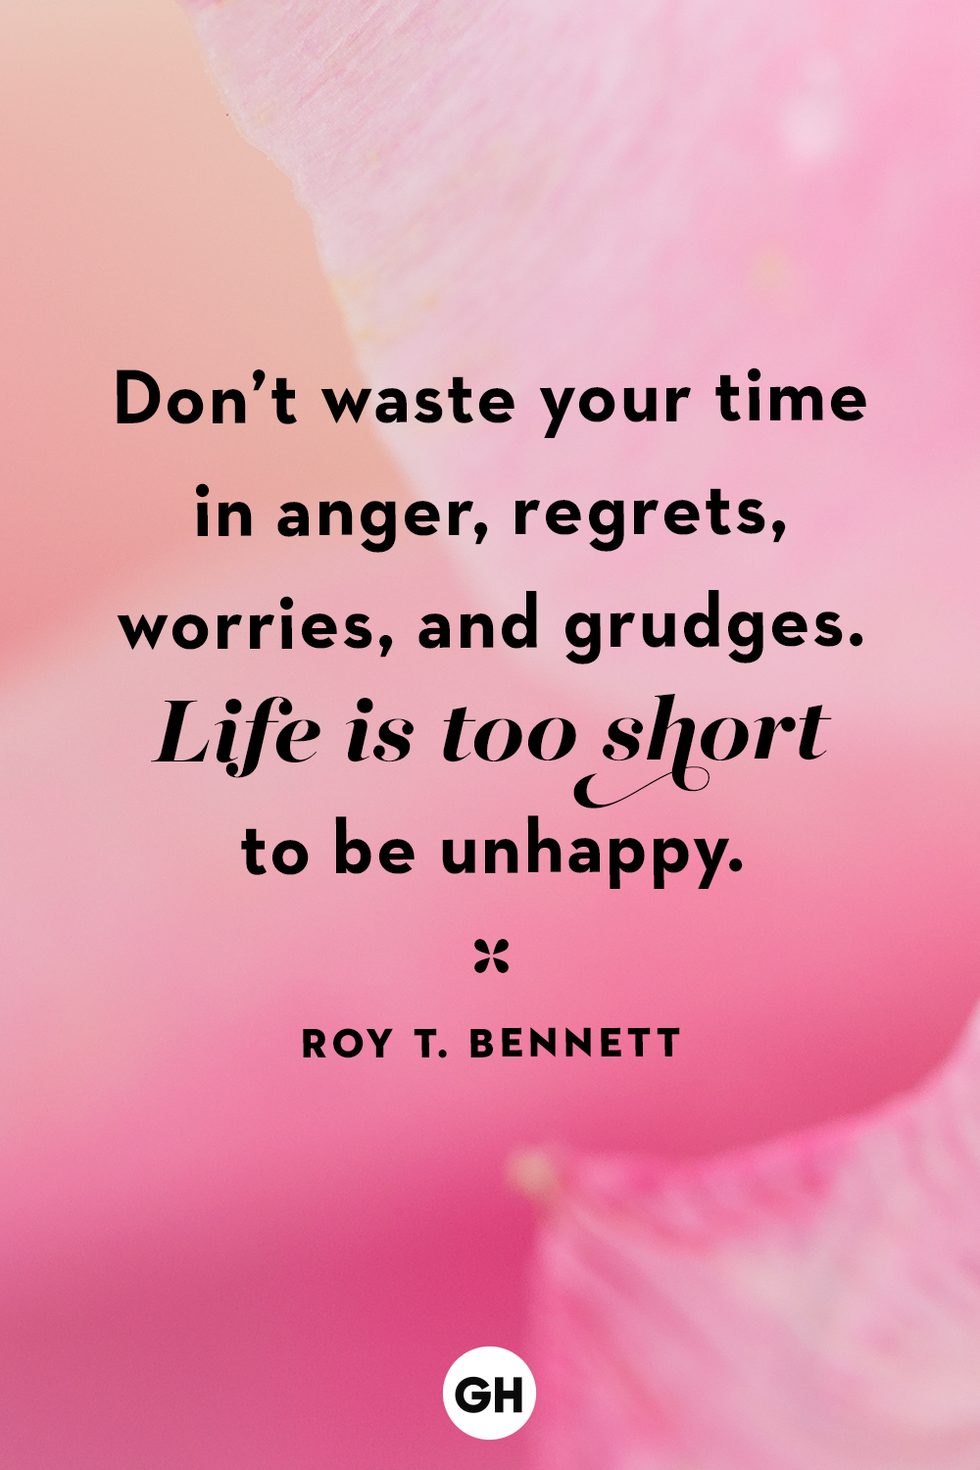 life-quotes-roy-t-bennett-1-1665419657.png